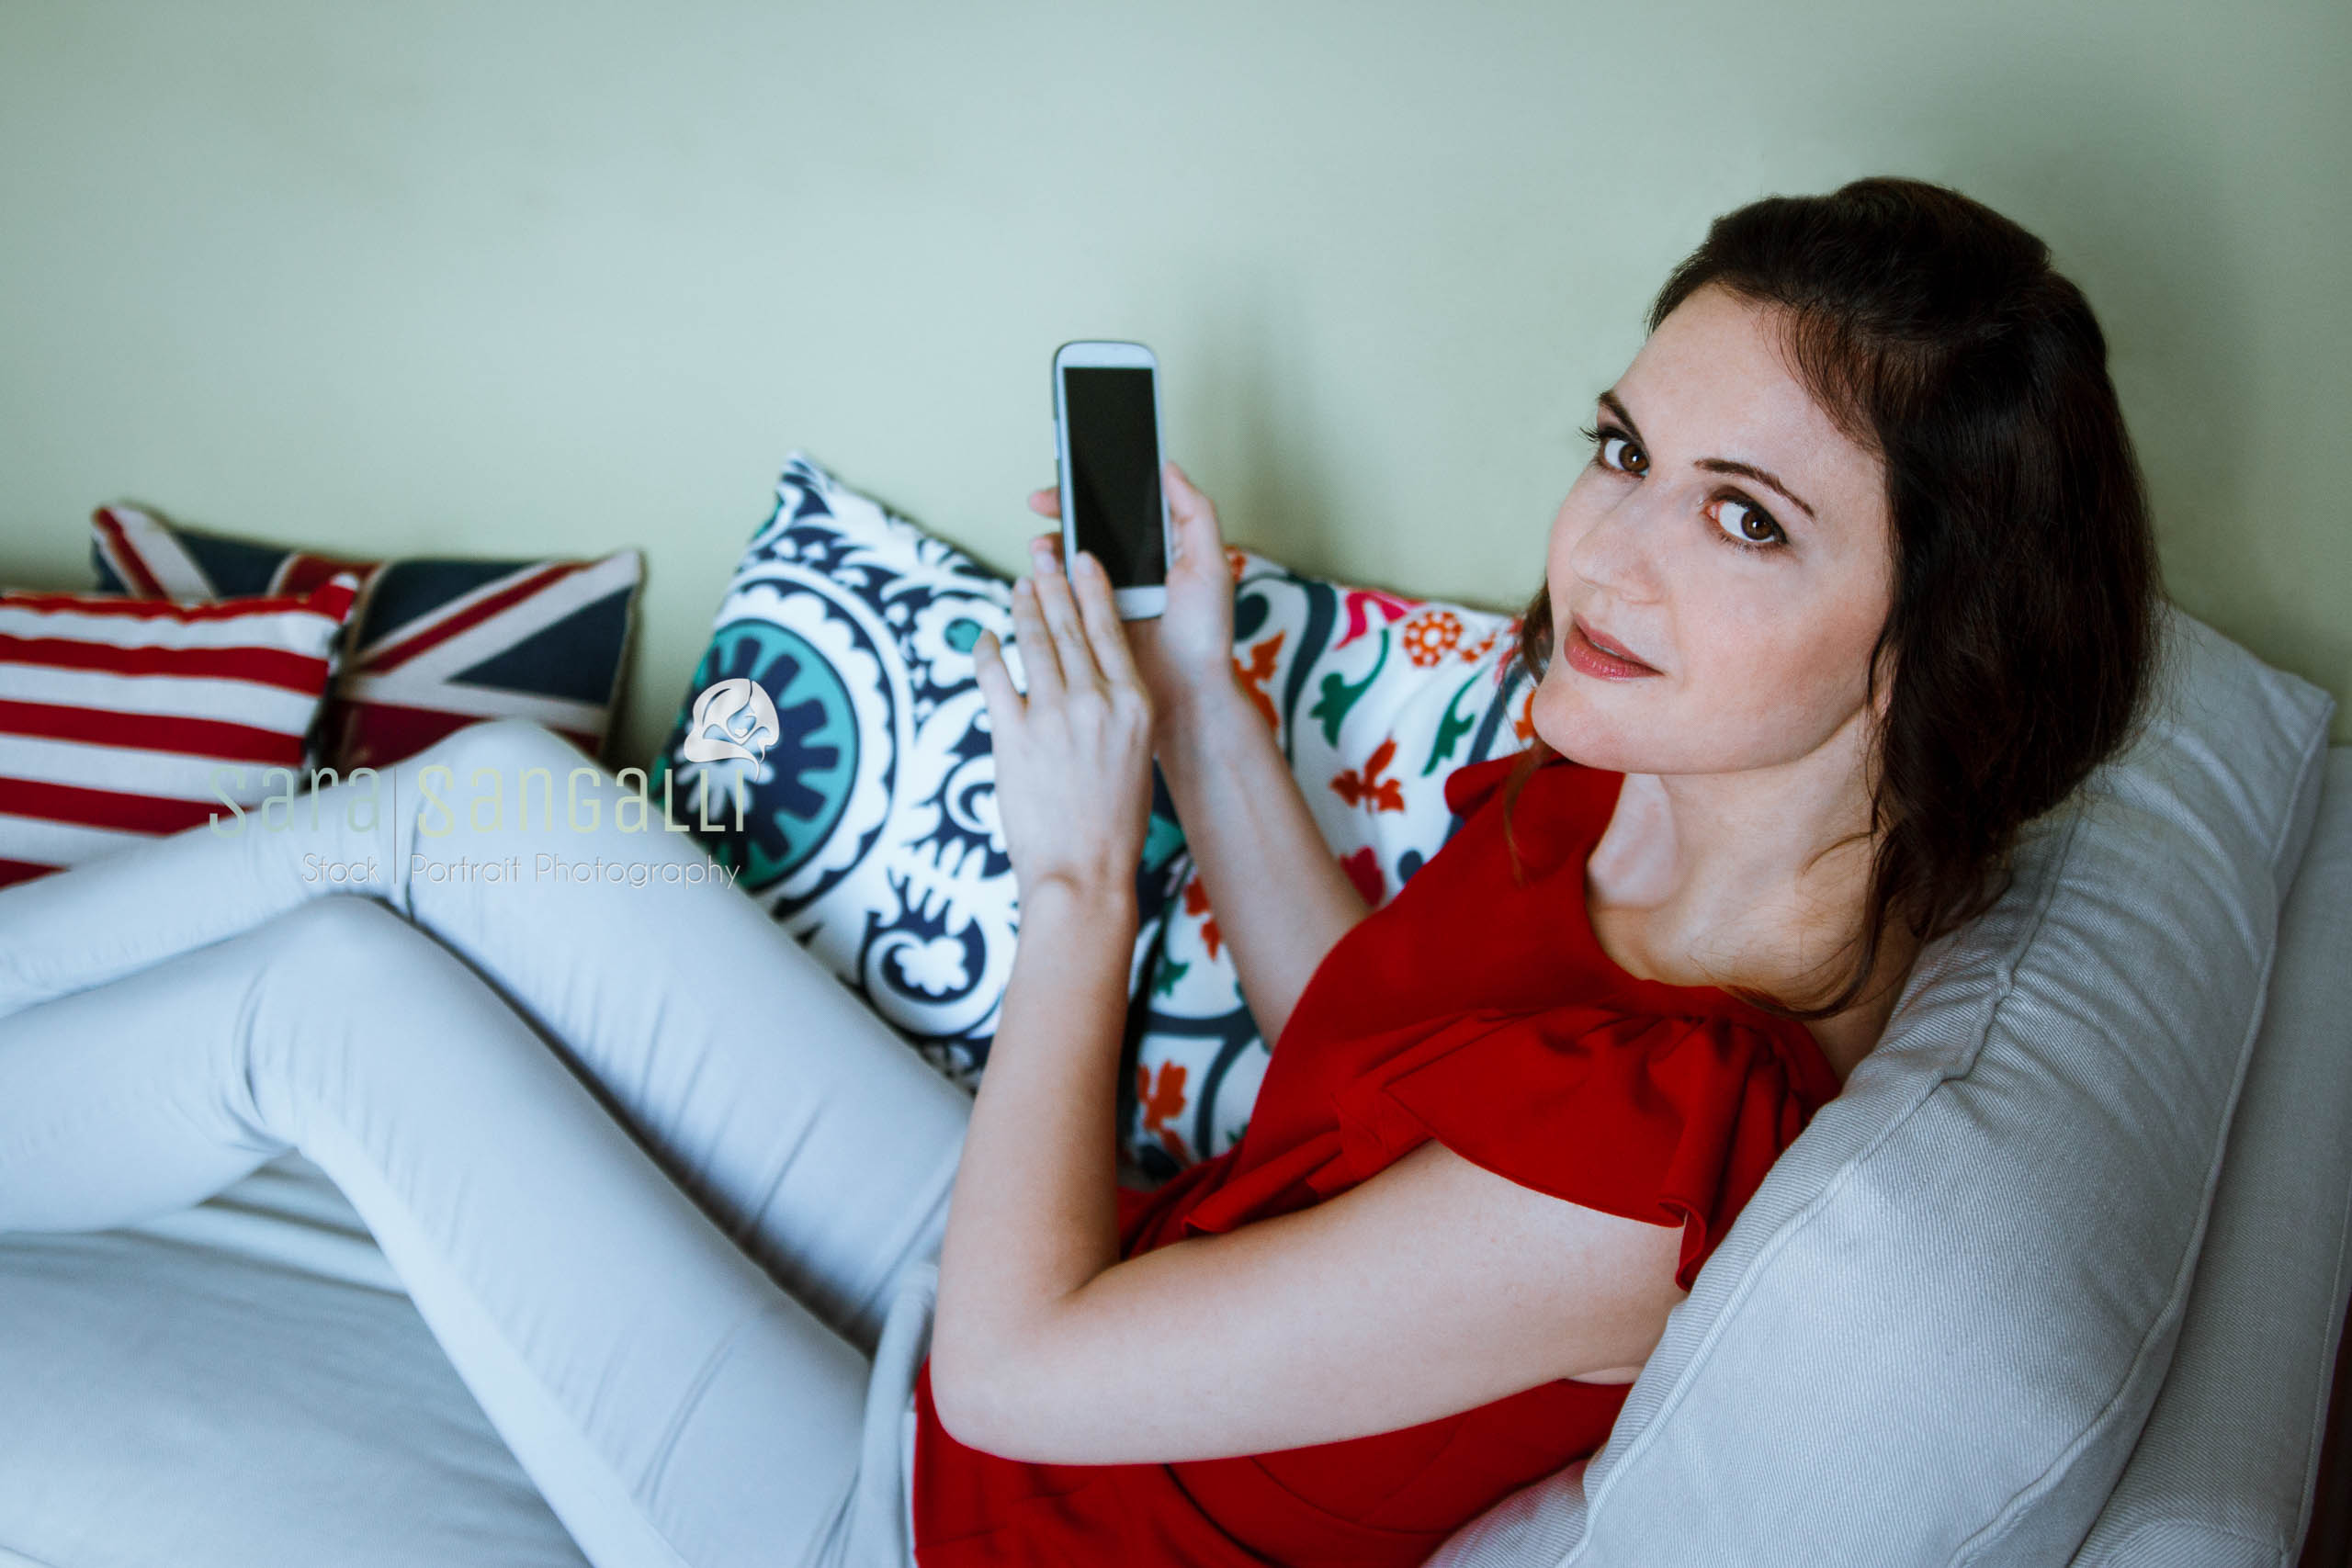 Brunette holding smartphone while sitting on a couch and looking at camera